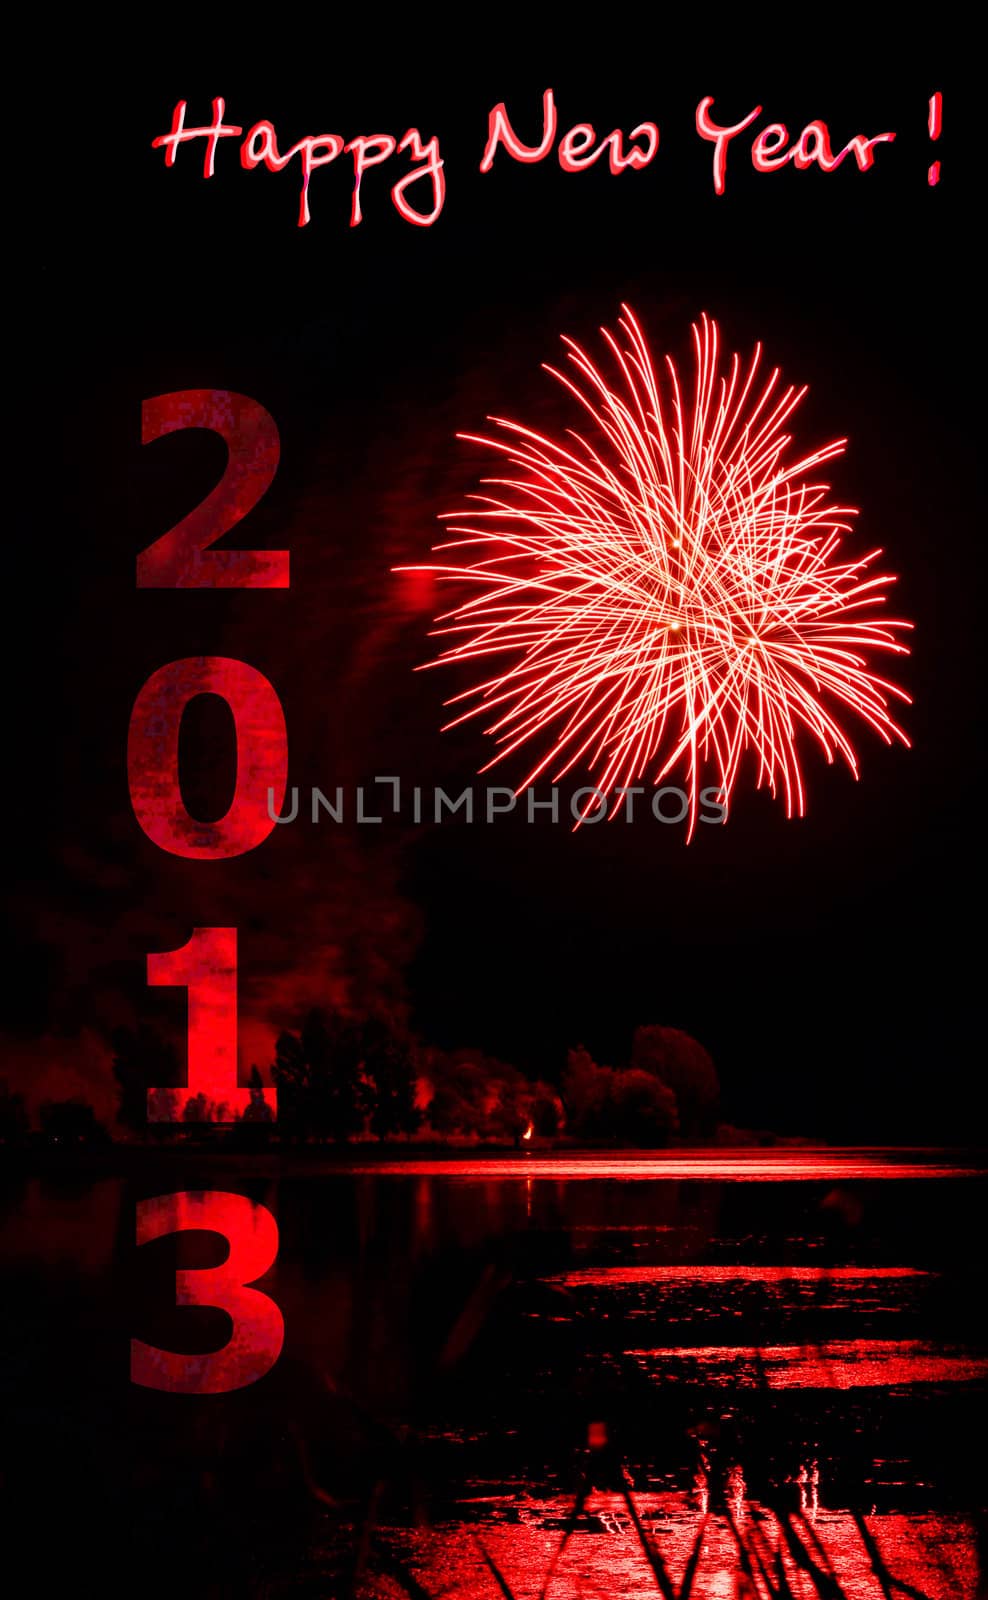 Beautiful 2013 red firework over a lake celebration background or new year's eve card.